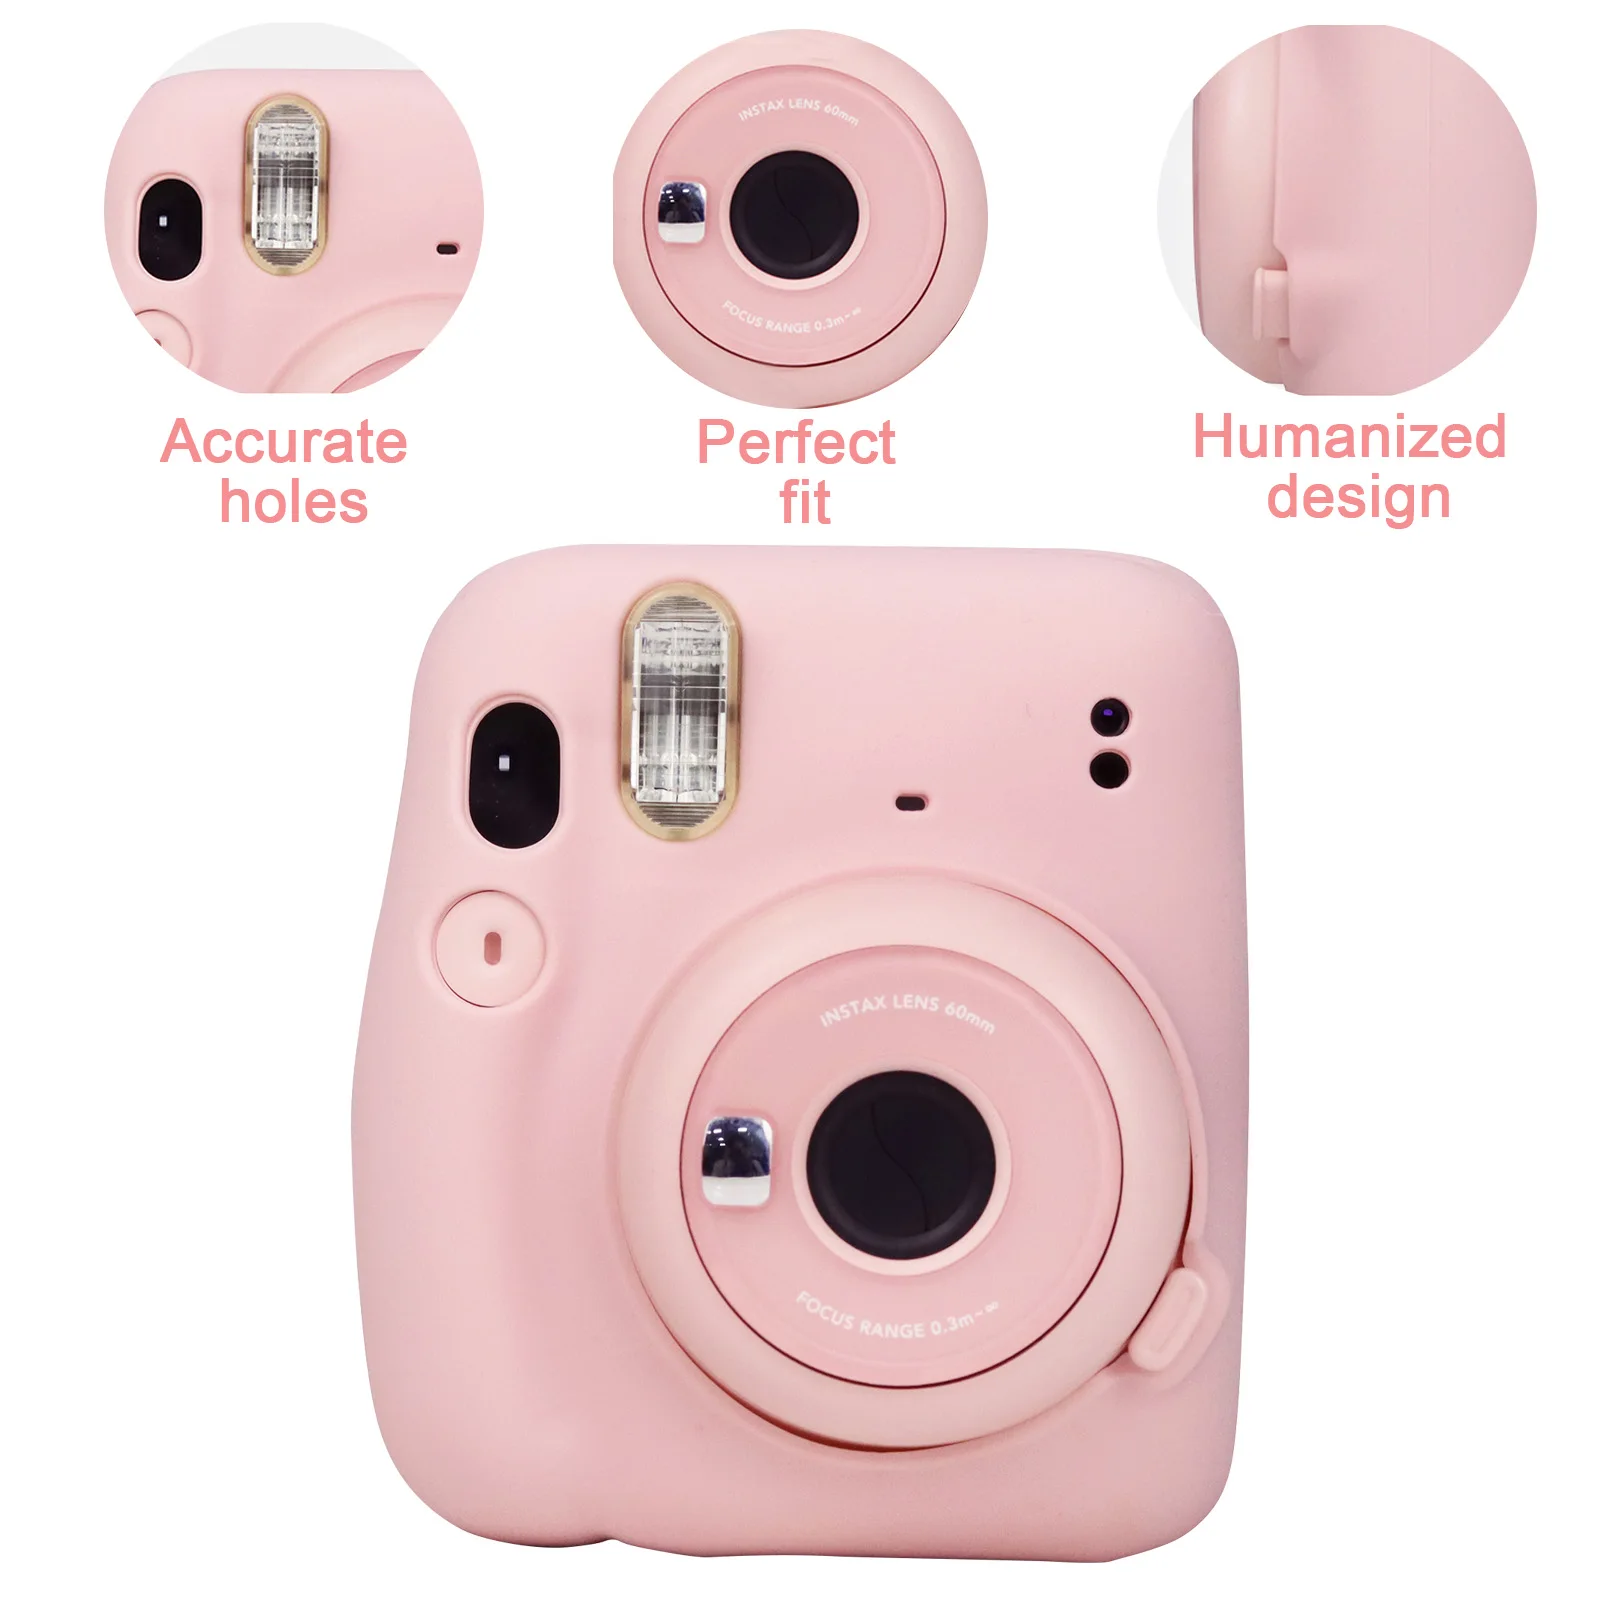 

Cute PU Leather Bag Protect Case Cover Shell with Shoulder Strap for Fujifilm Instax Mini 11 Instant Film Camera